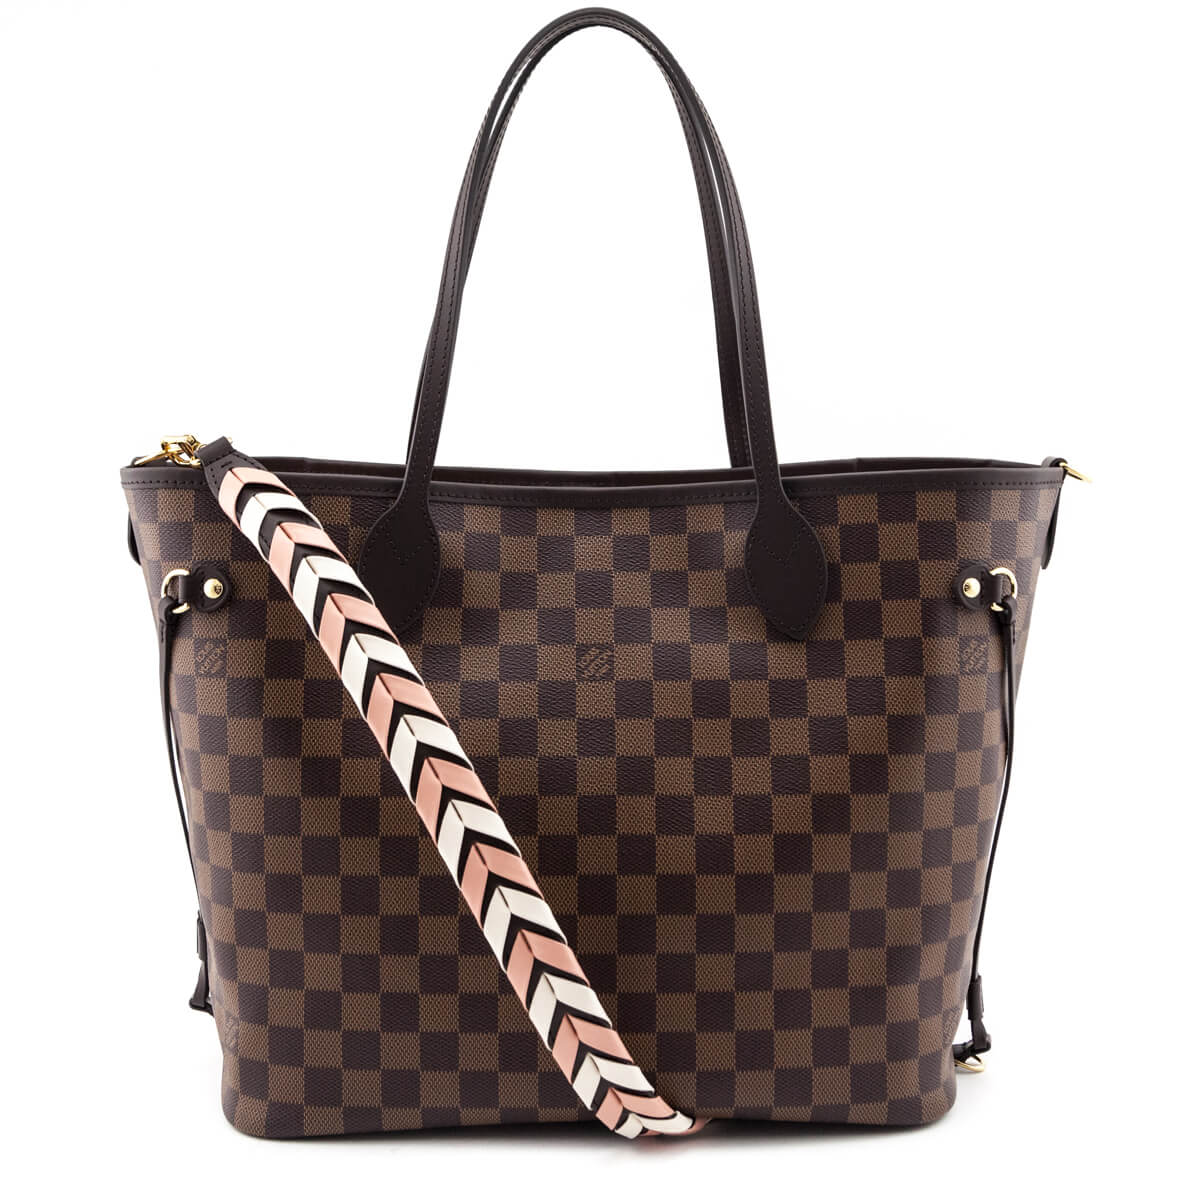 The Damier Azur Braided Croisette Rose is a limited edition of a